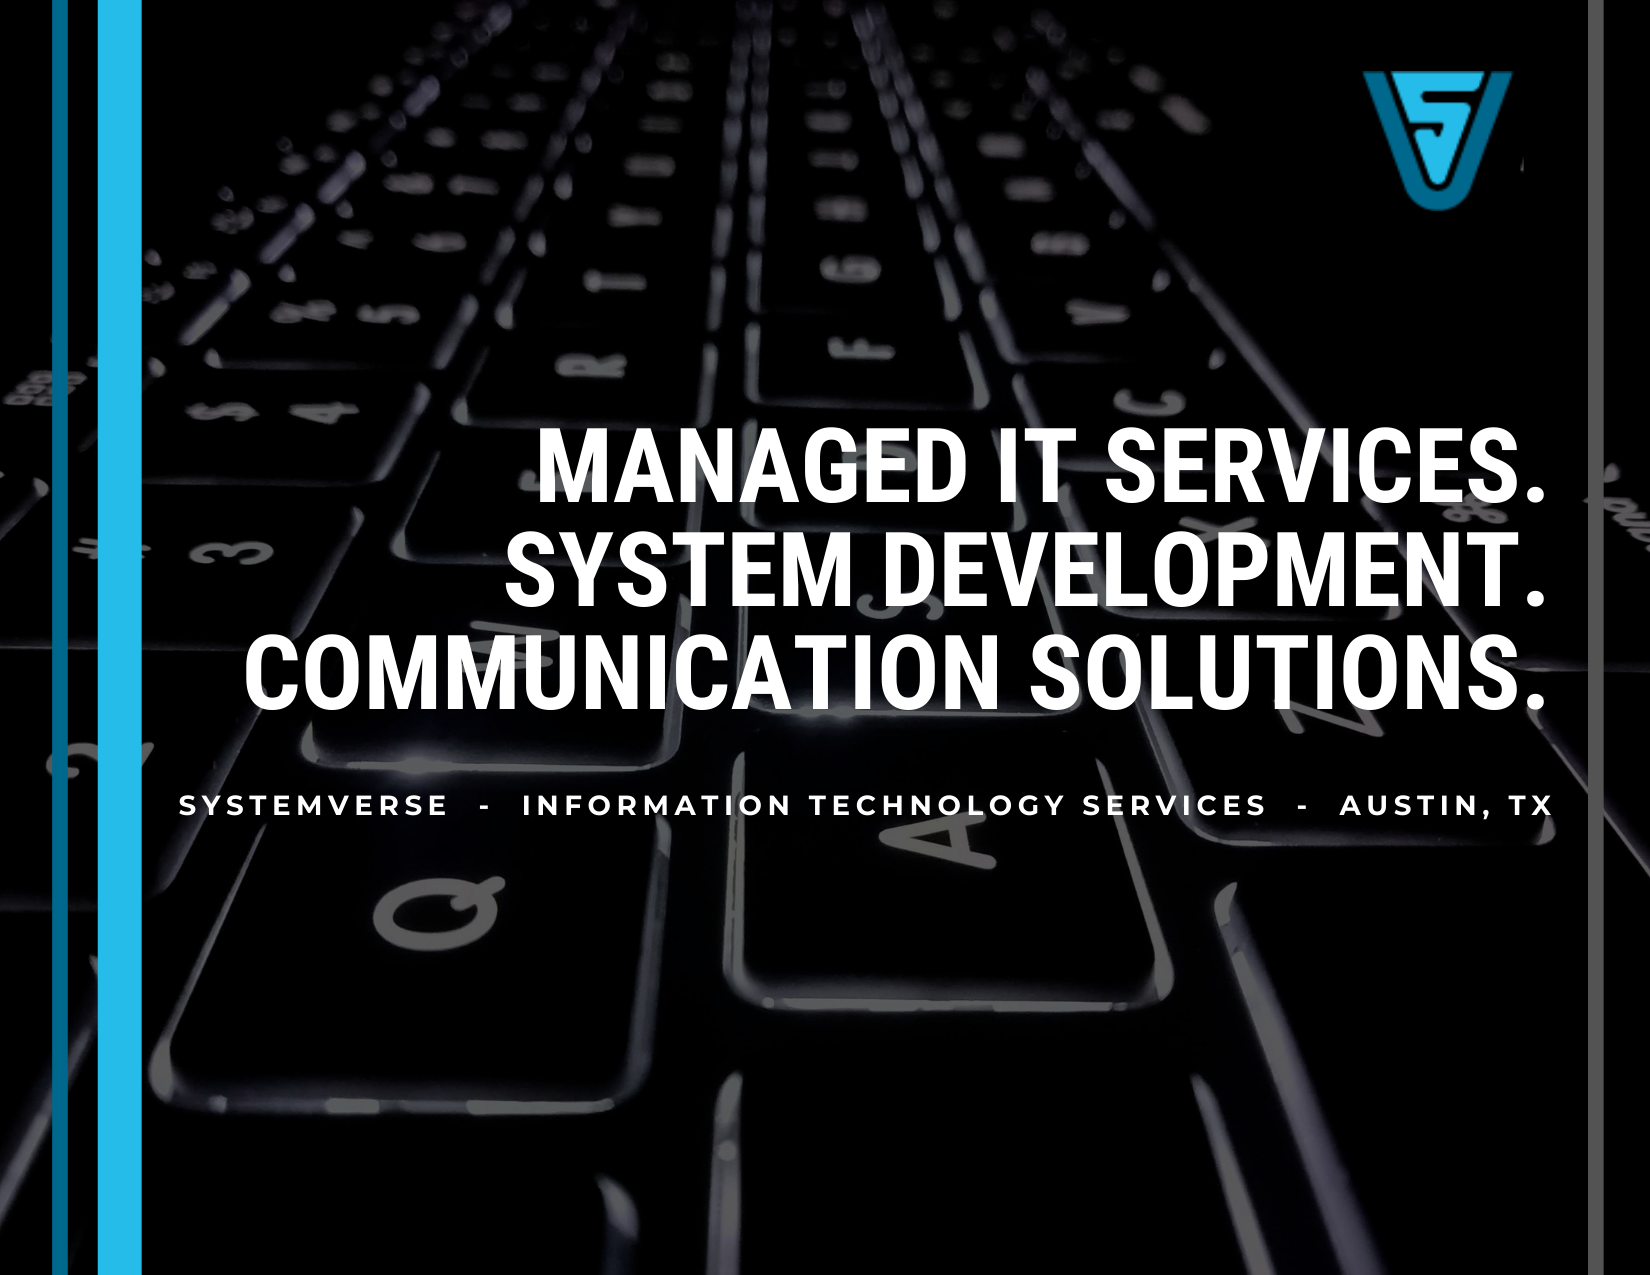 Systemverse IT Services